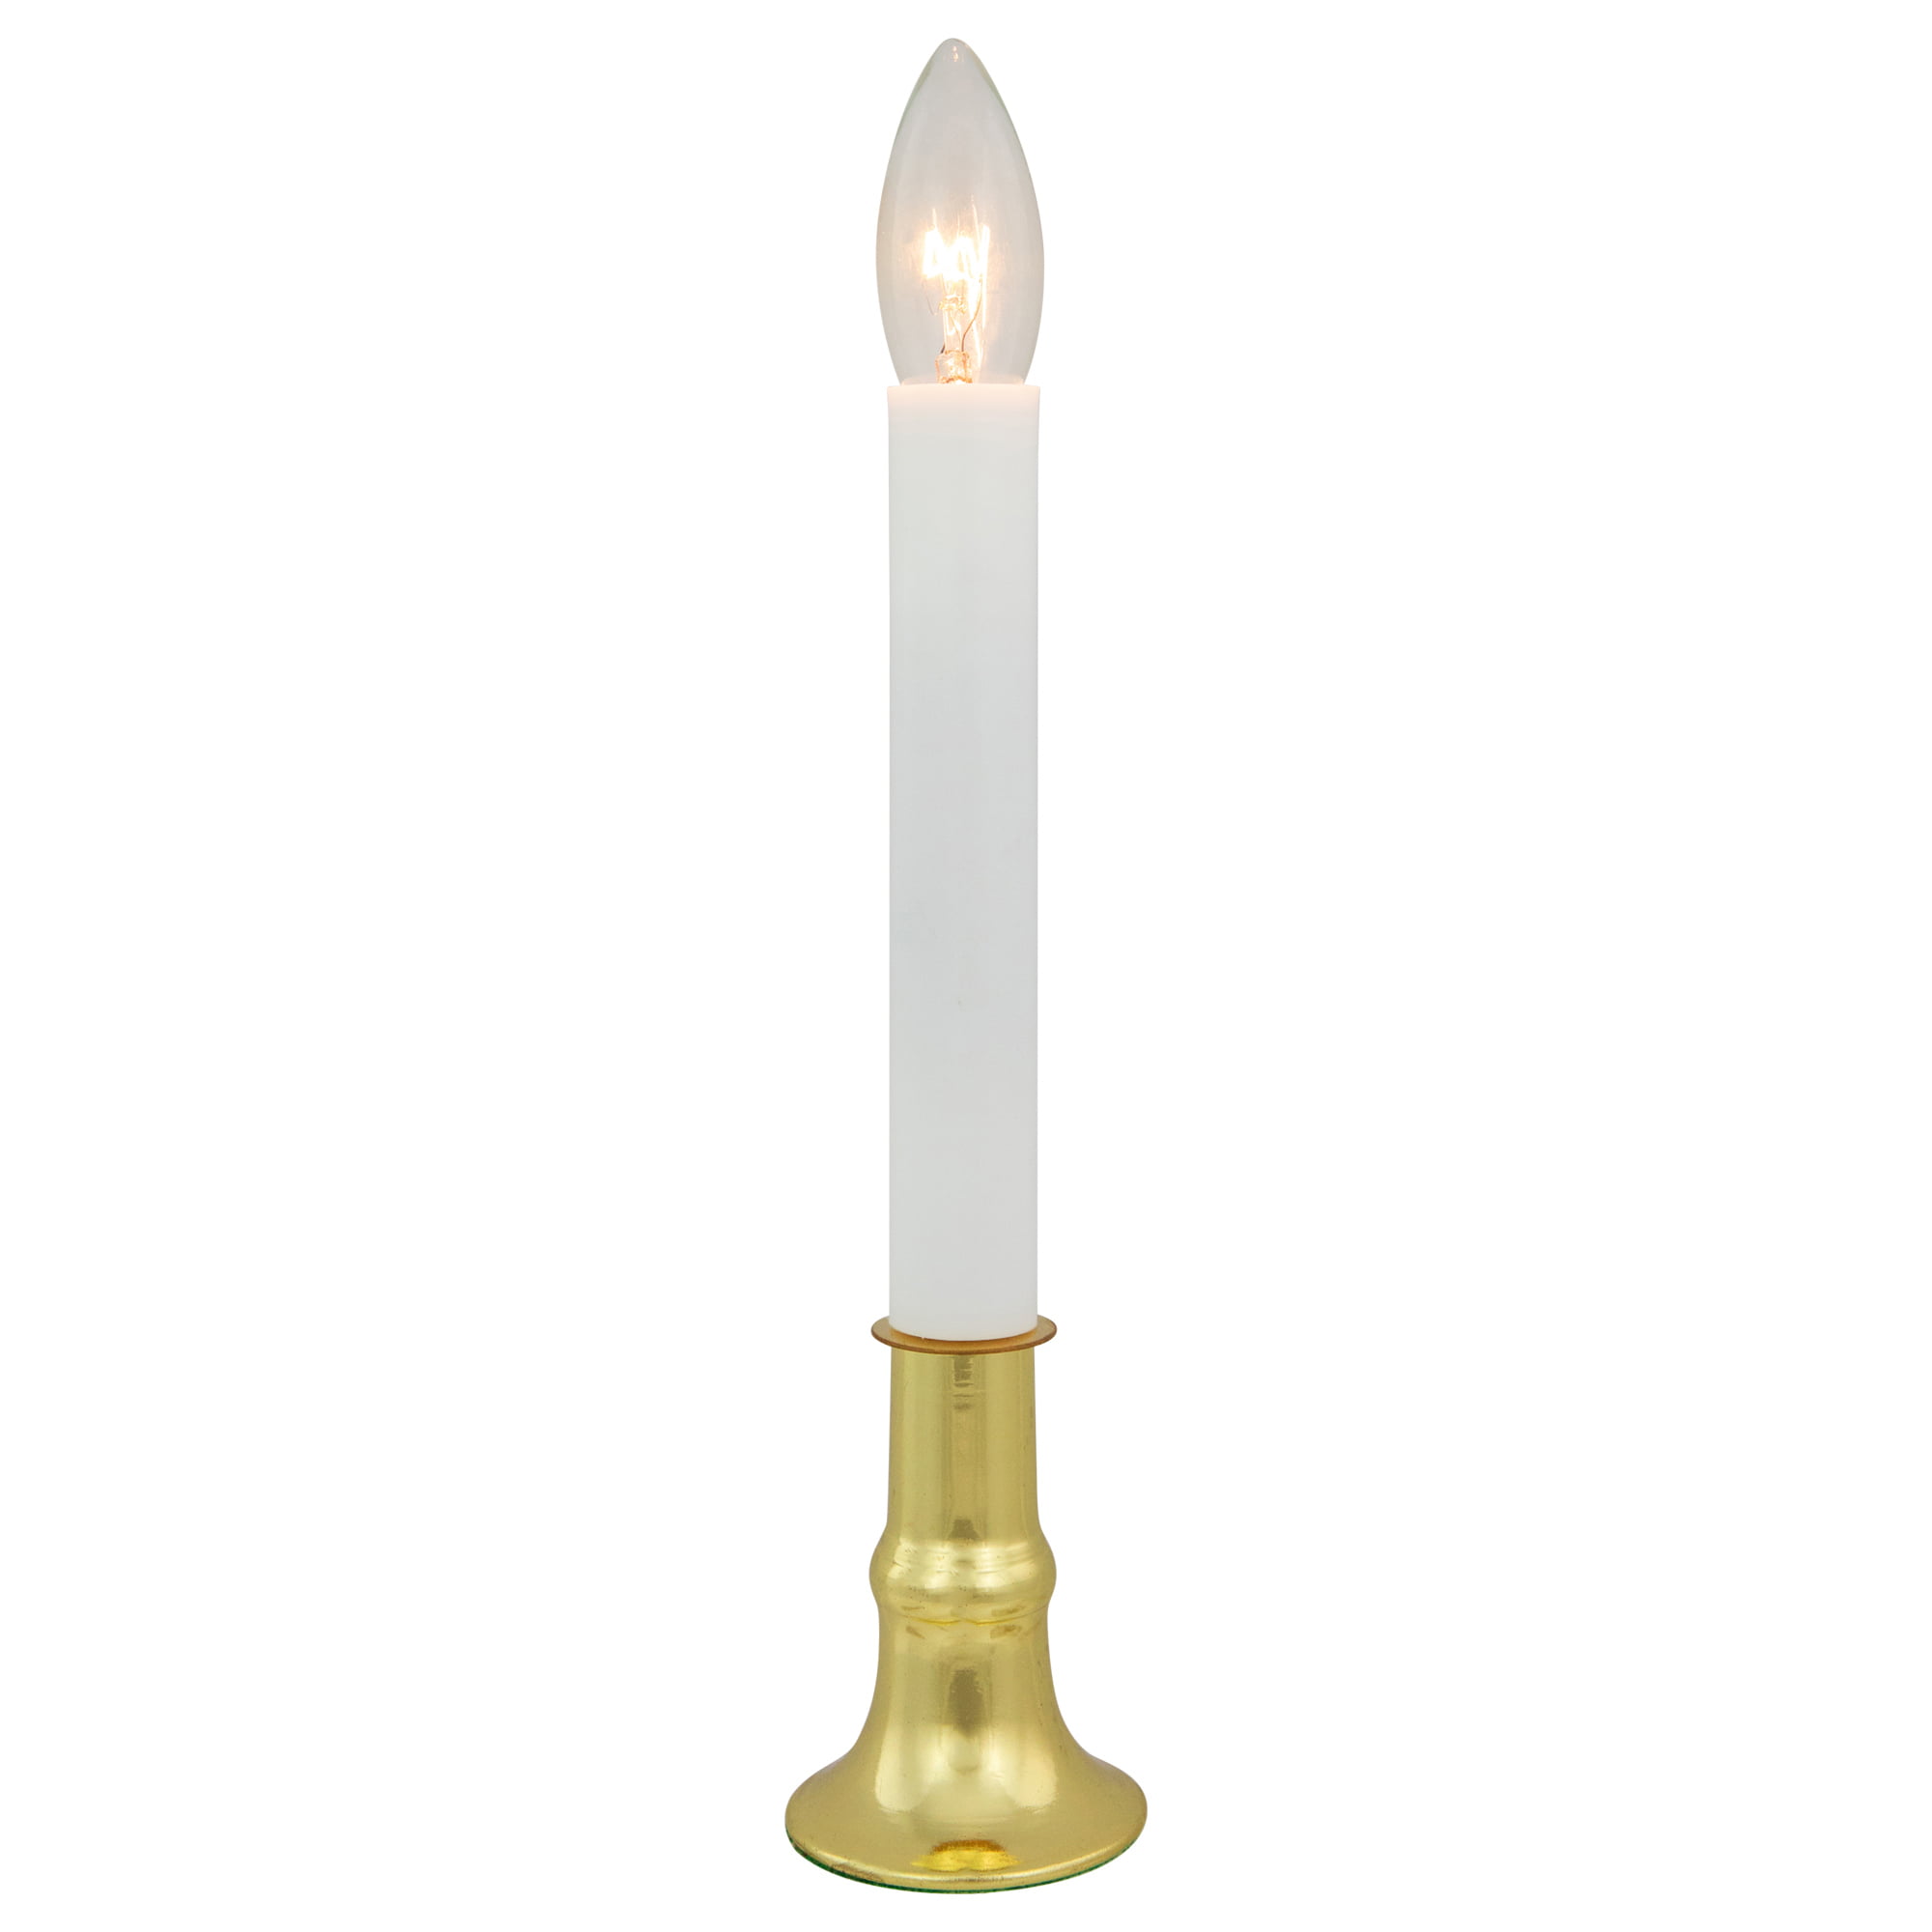 Sylvania V1533-88 9" Gold Battery Operated Christmas Candle Candoliers 8 